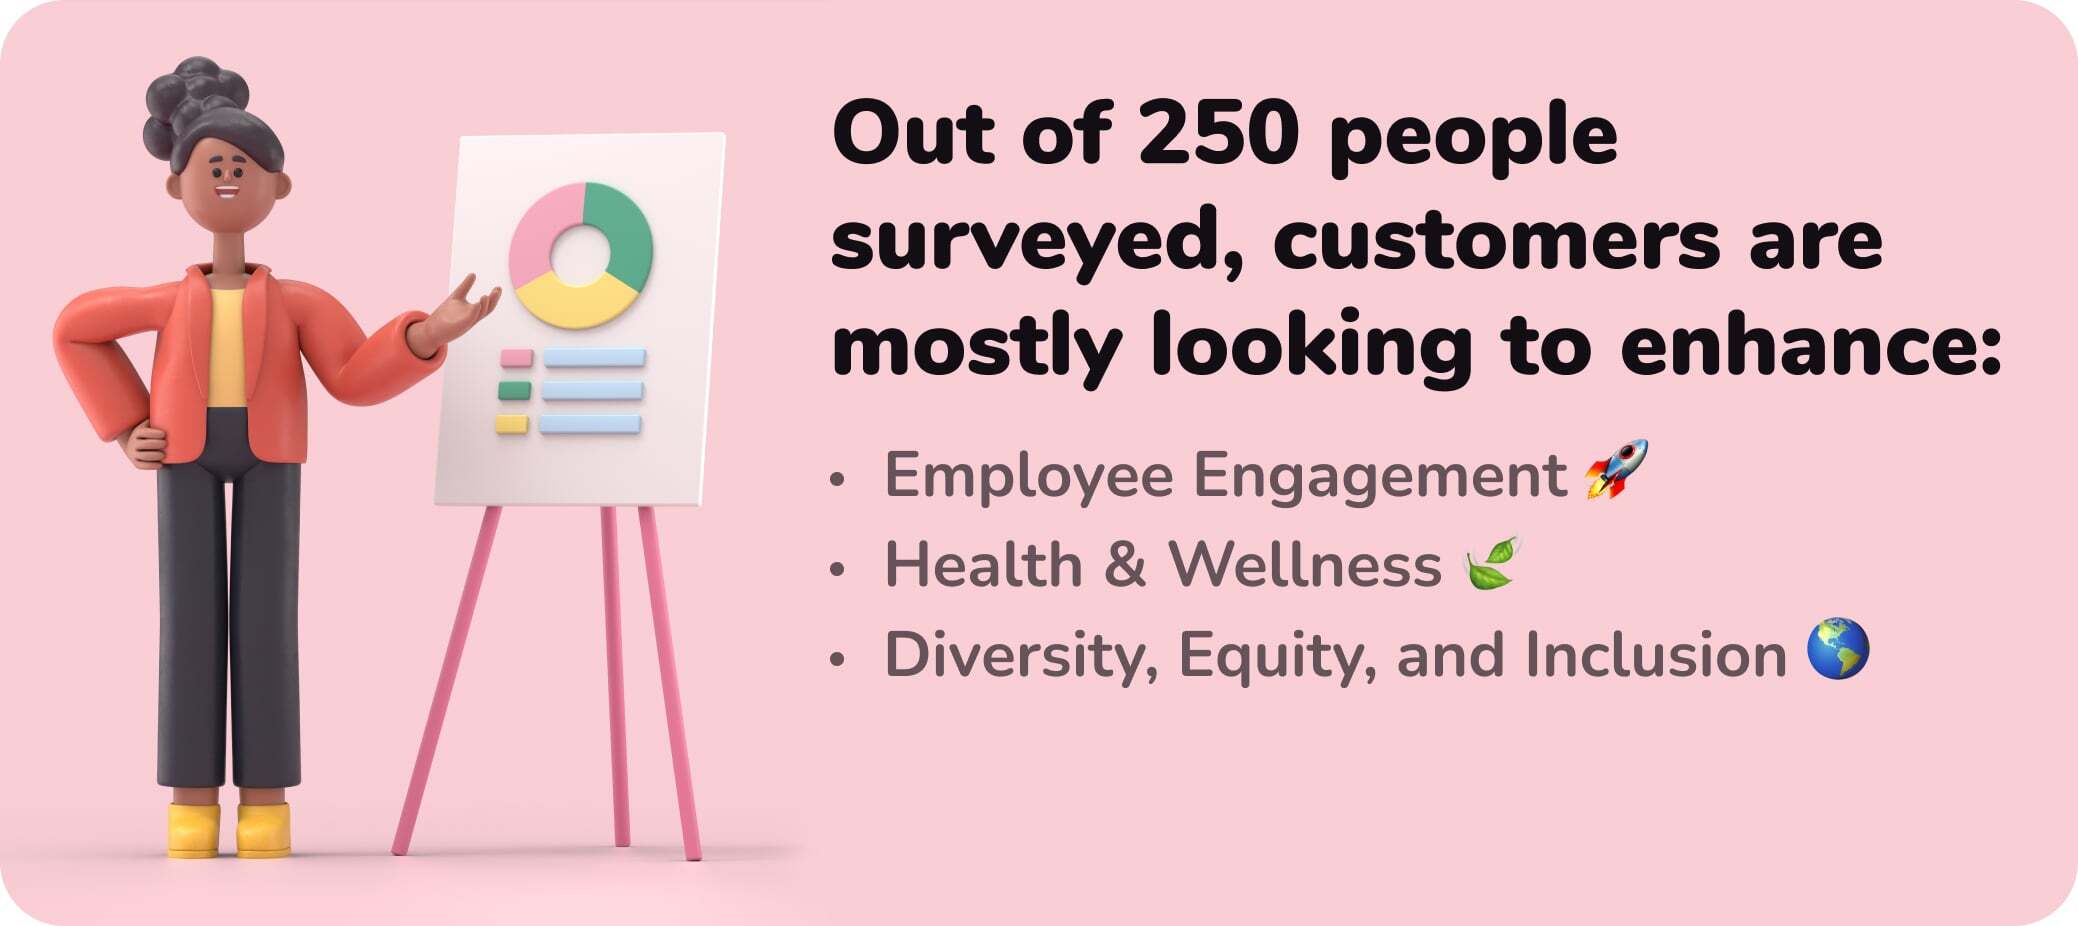 Out of 250 people surveyed, customers are mostly looking to enhance: Employee Engagement, Health & Wellness, and Diversity, Equity, and Inclusion